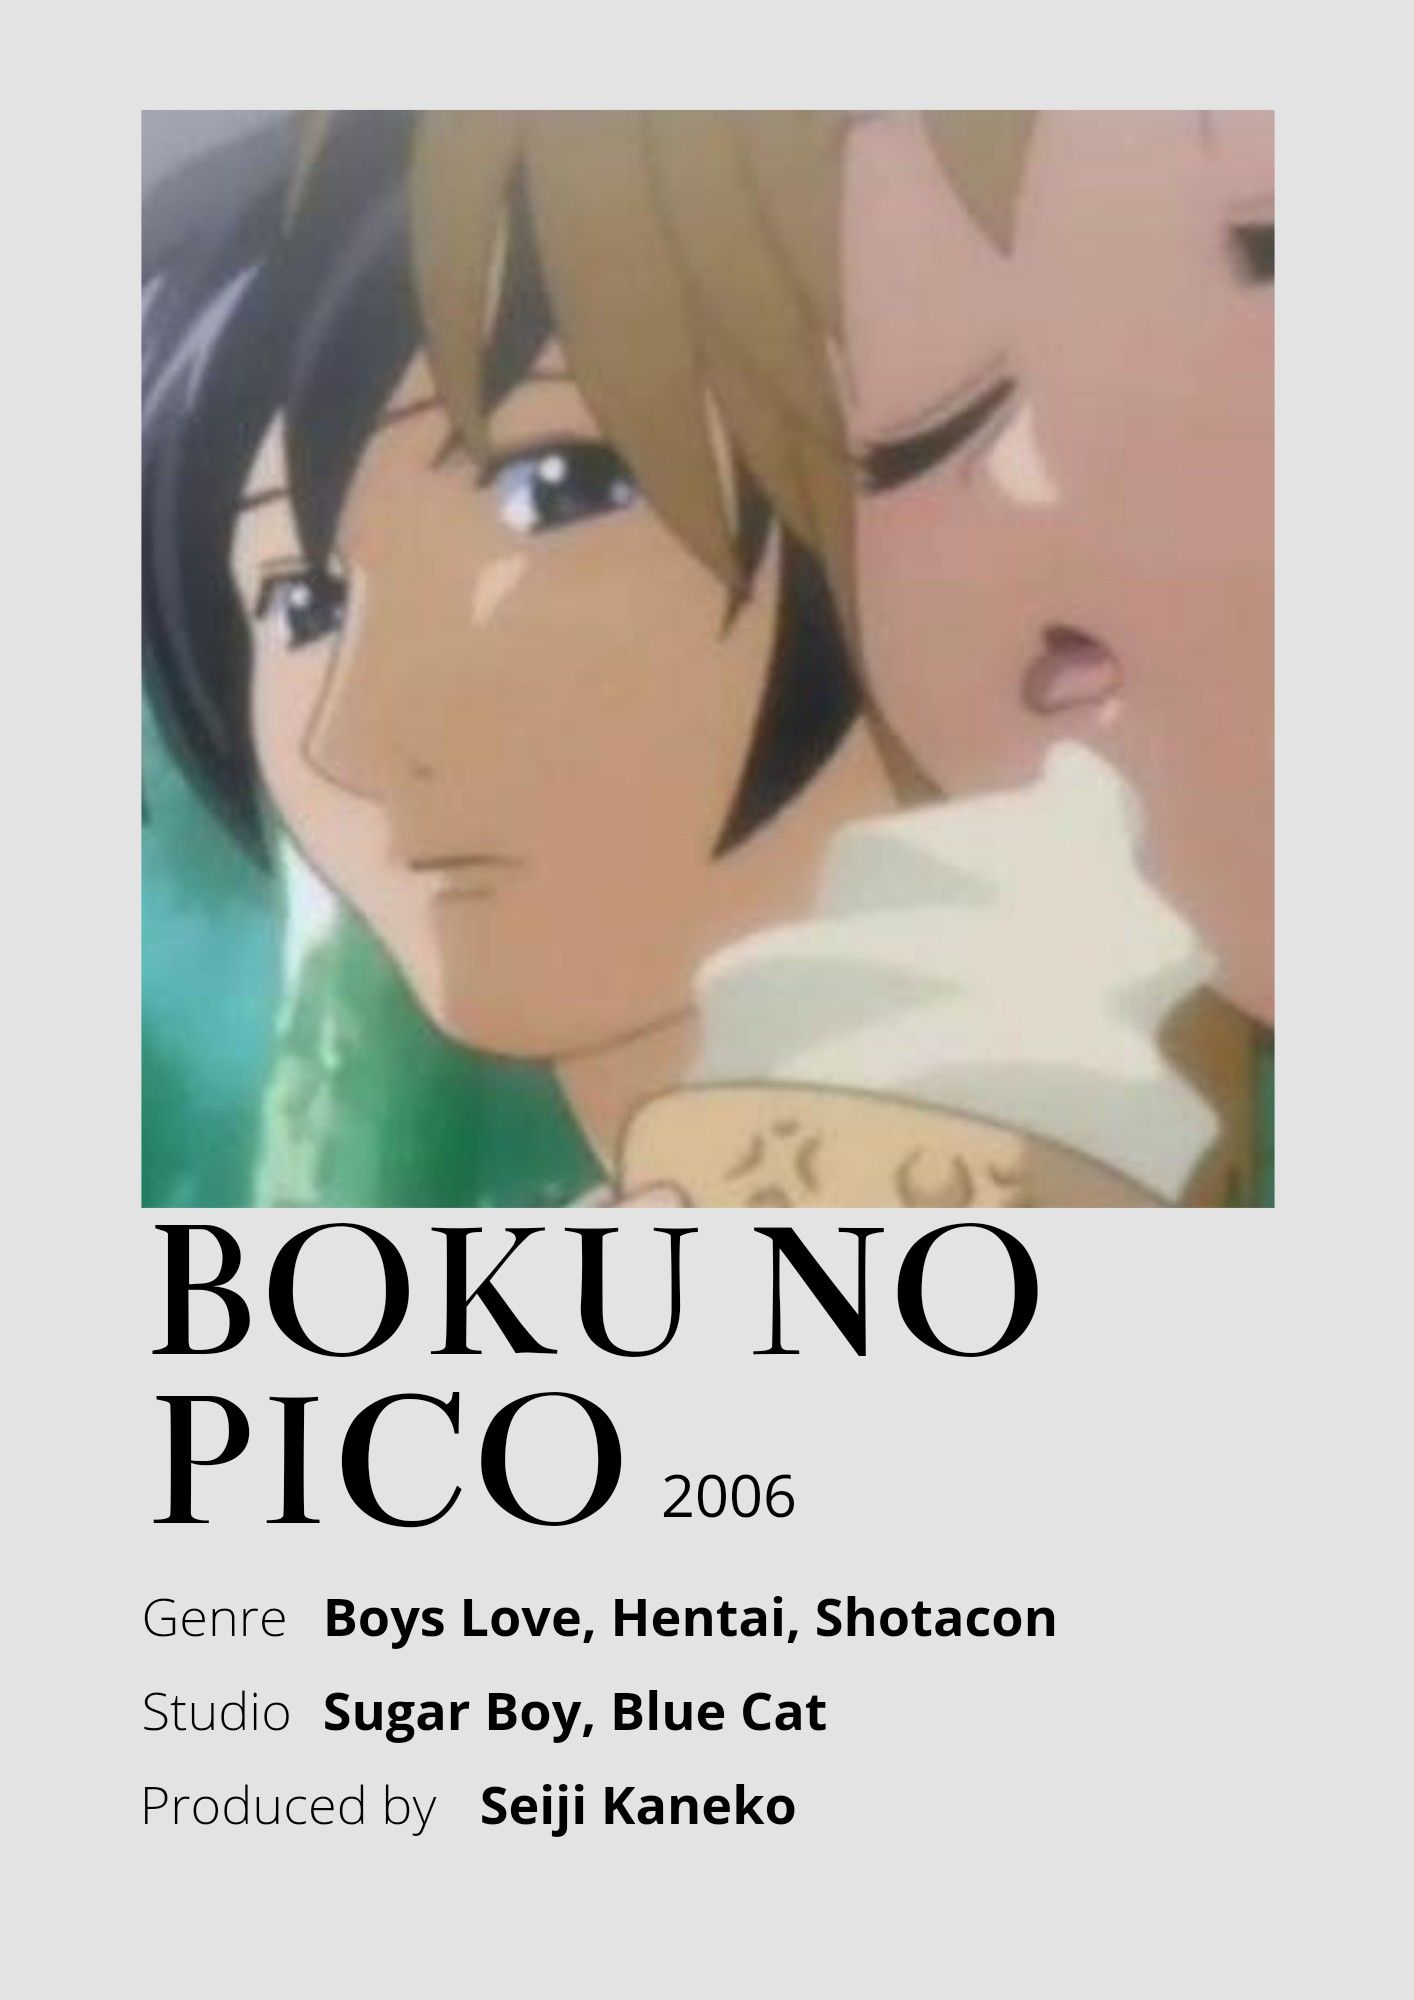 cmutetris forresearch recommends anime like boku no pico pic